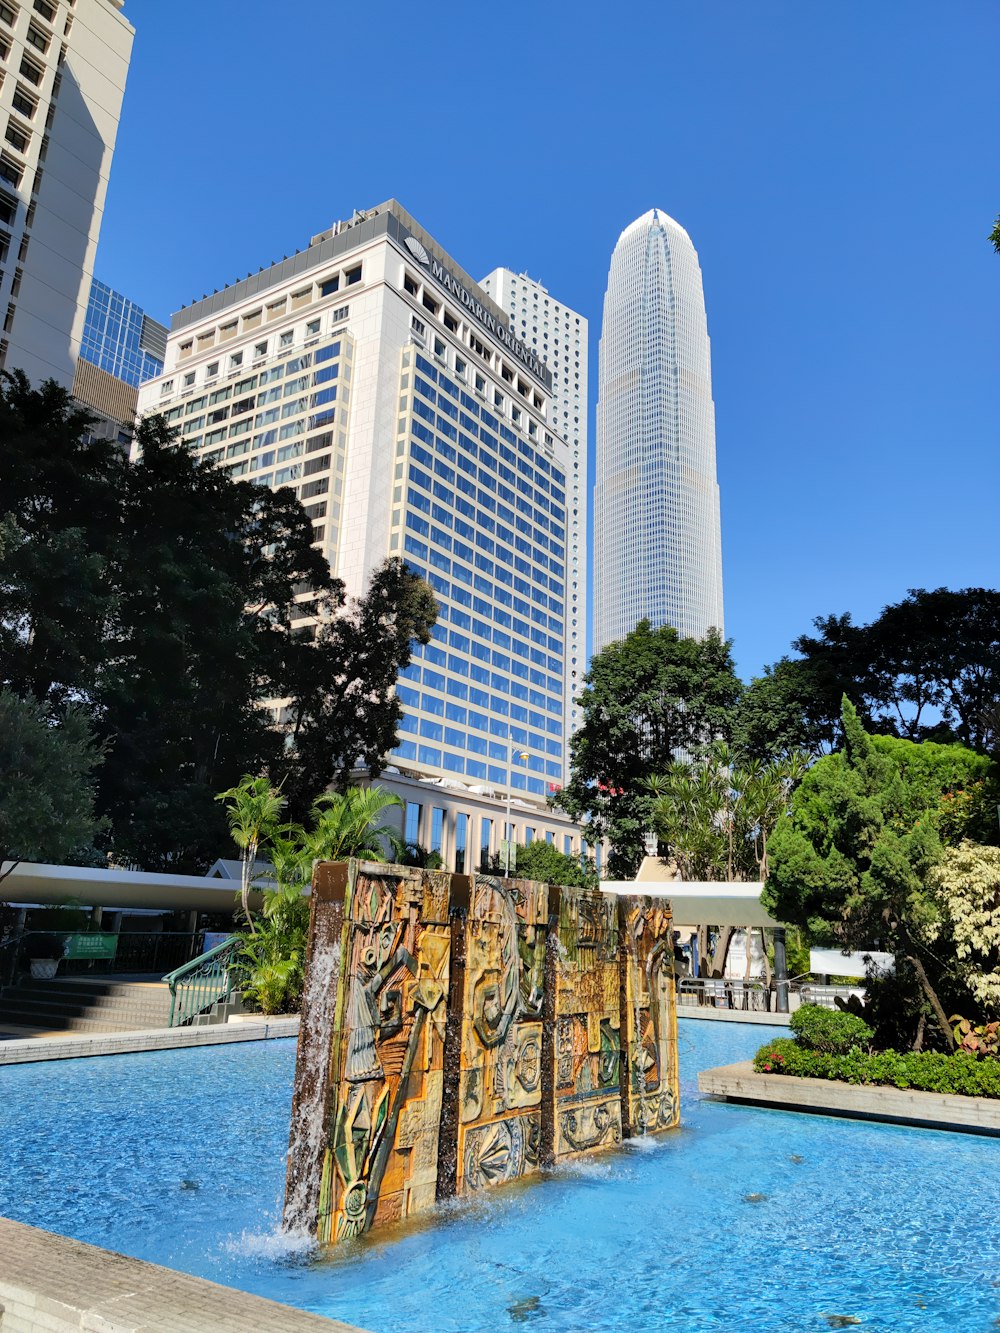 a fountain in the middle of a park with tall buildings in the background